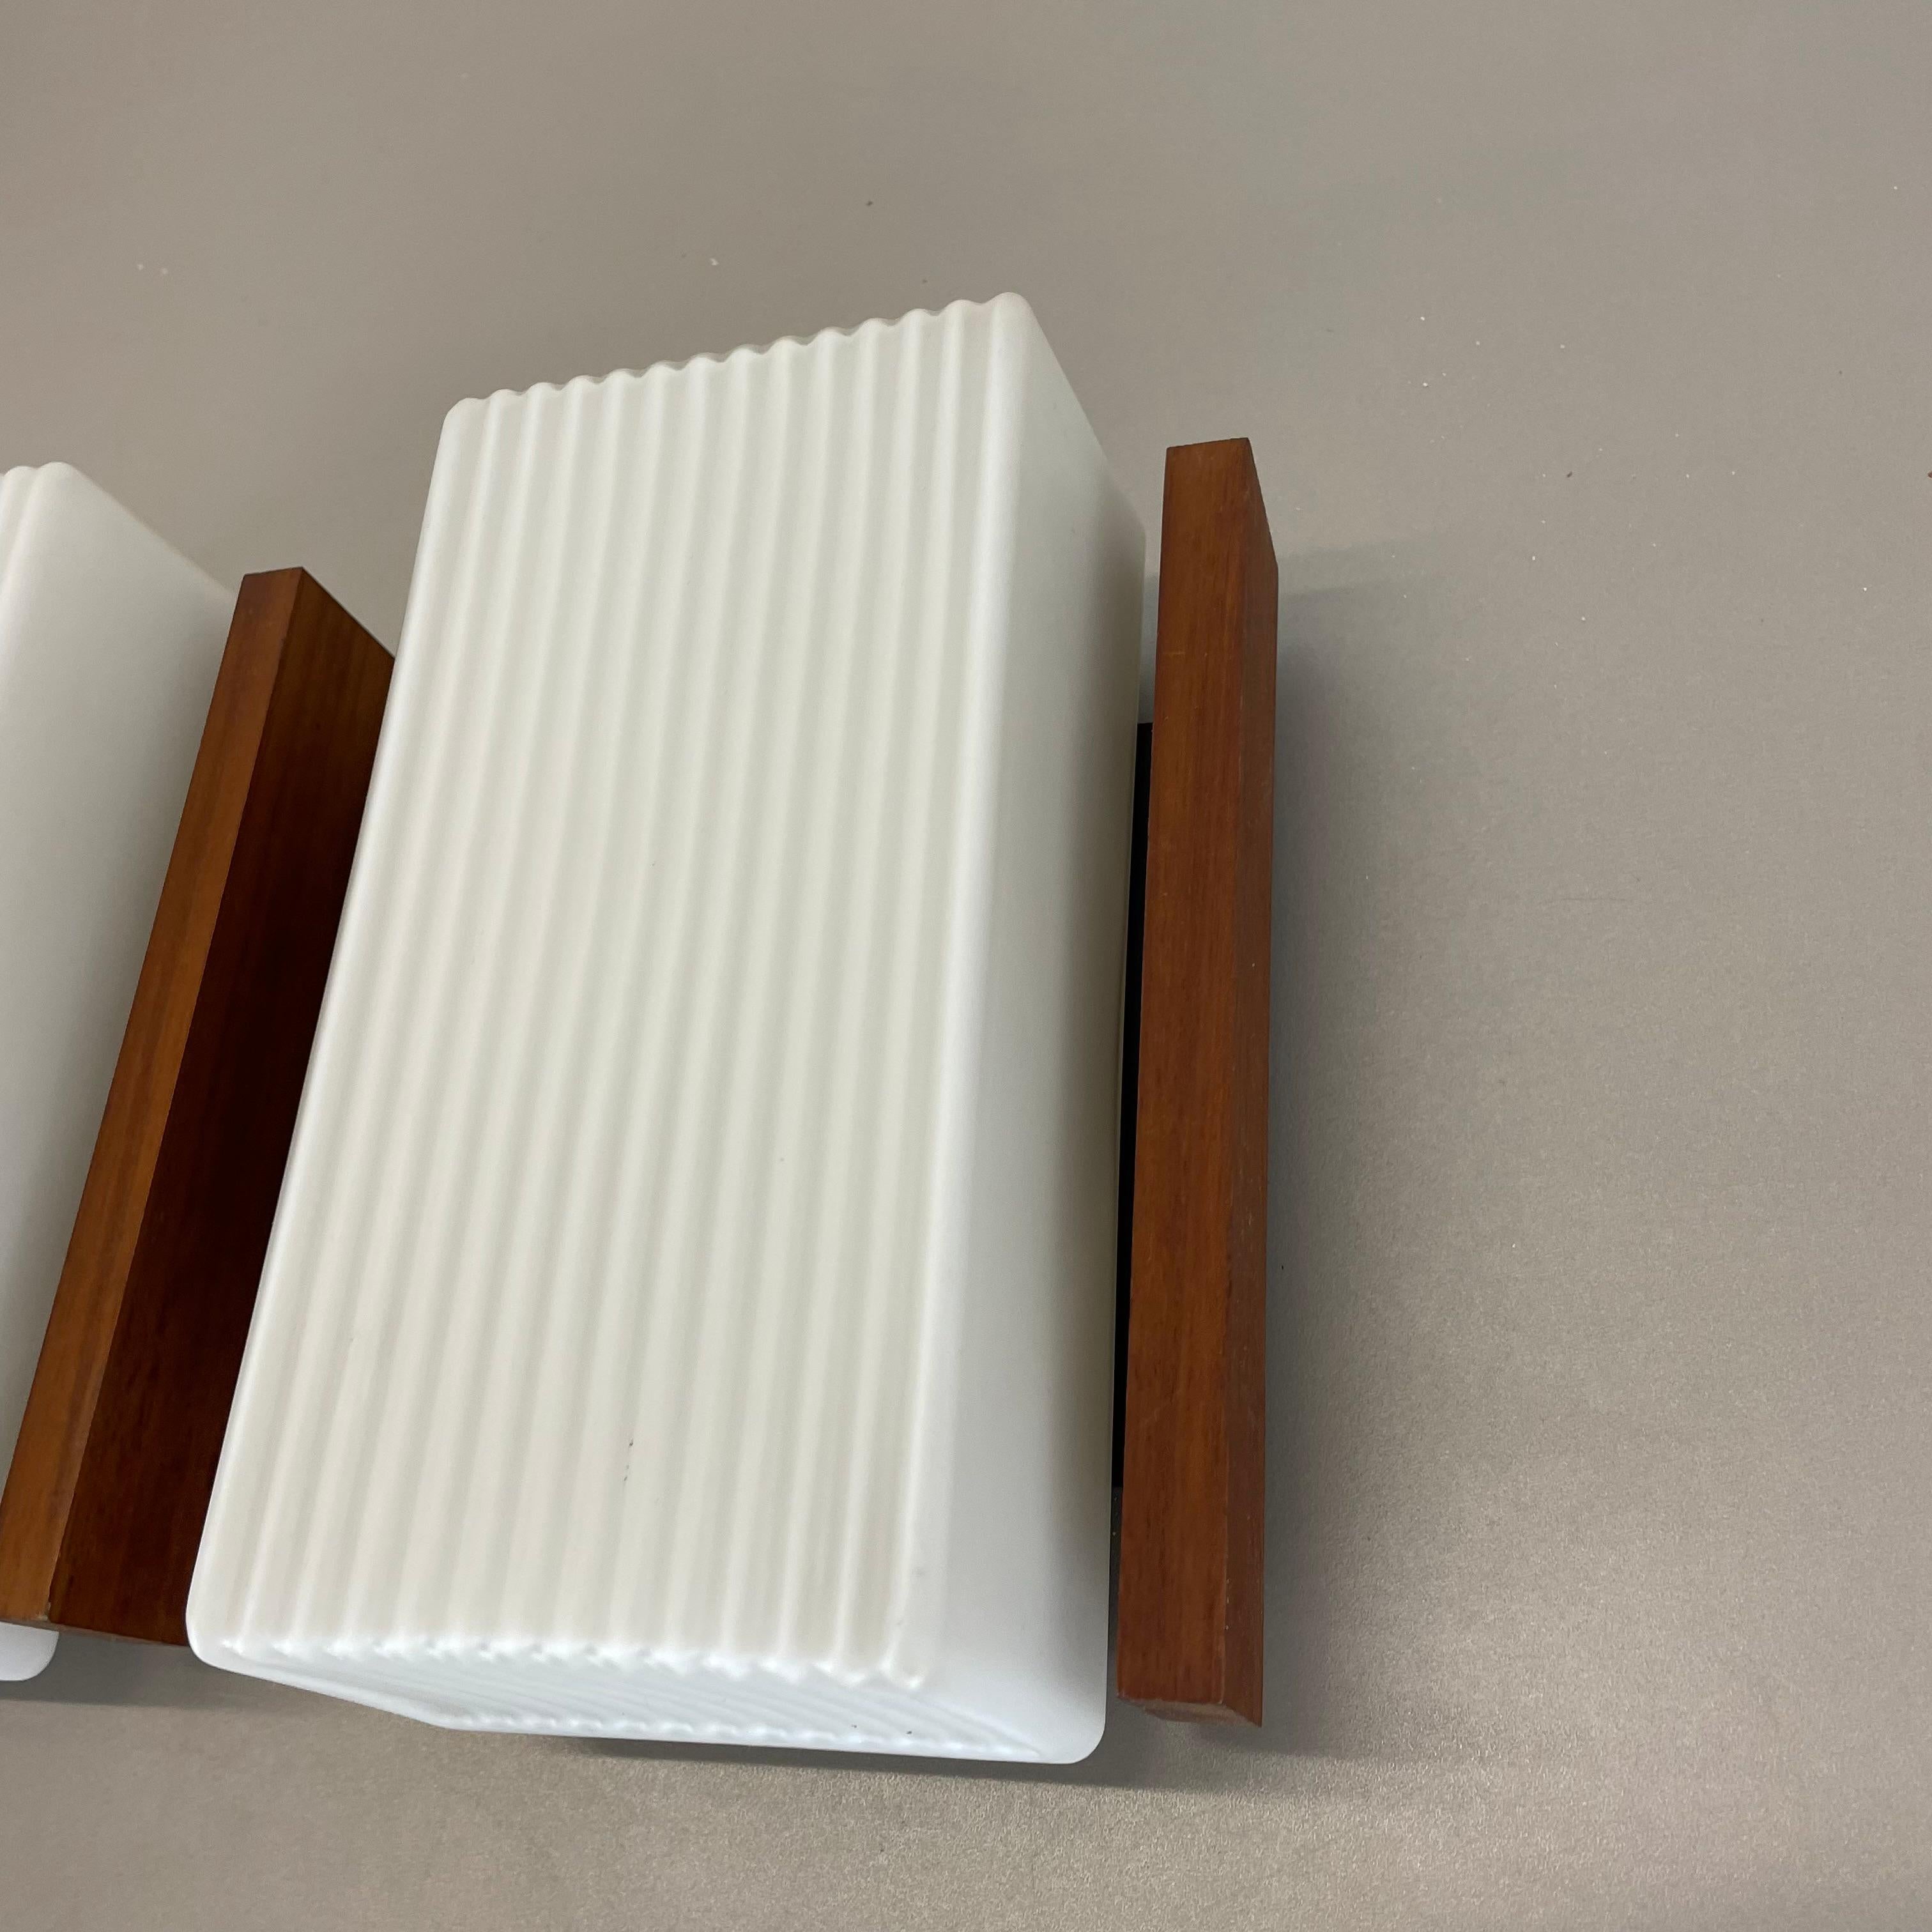 Set of 2 satin white glass and teak Wall Lights by BEGA Lights, Germany 1960s For Sale 4